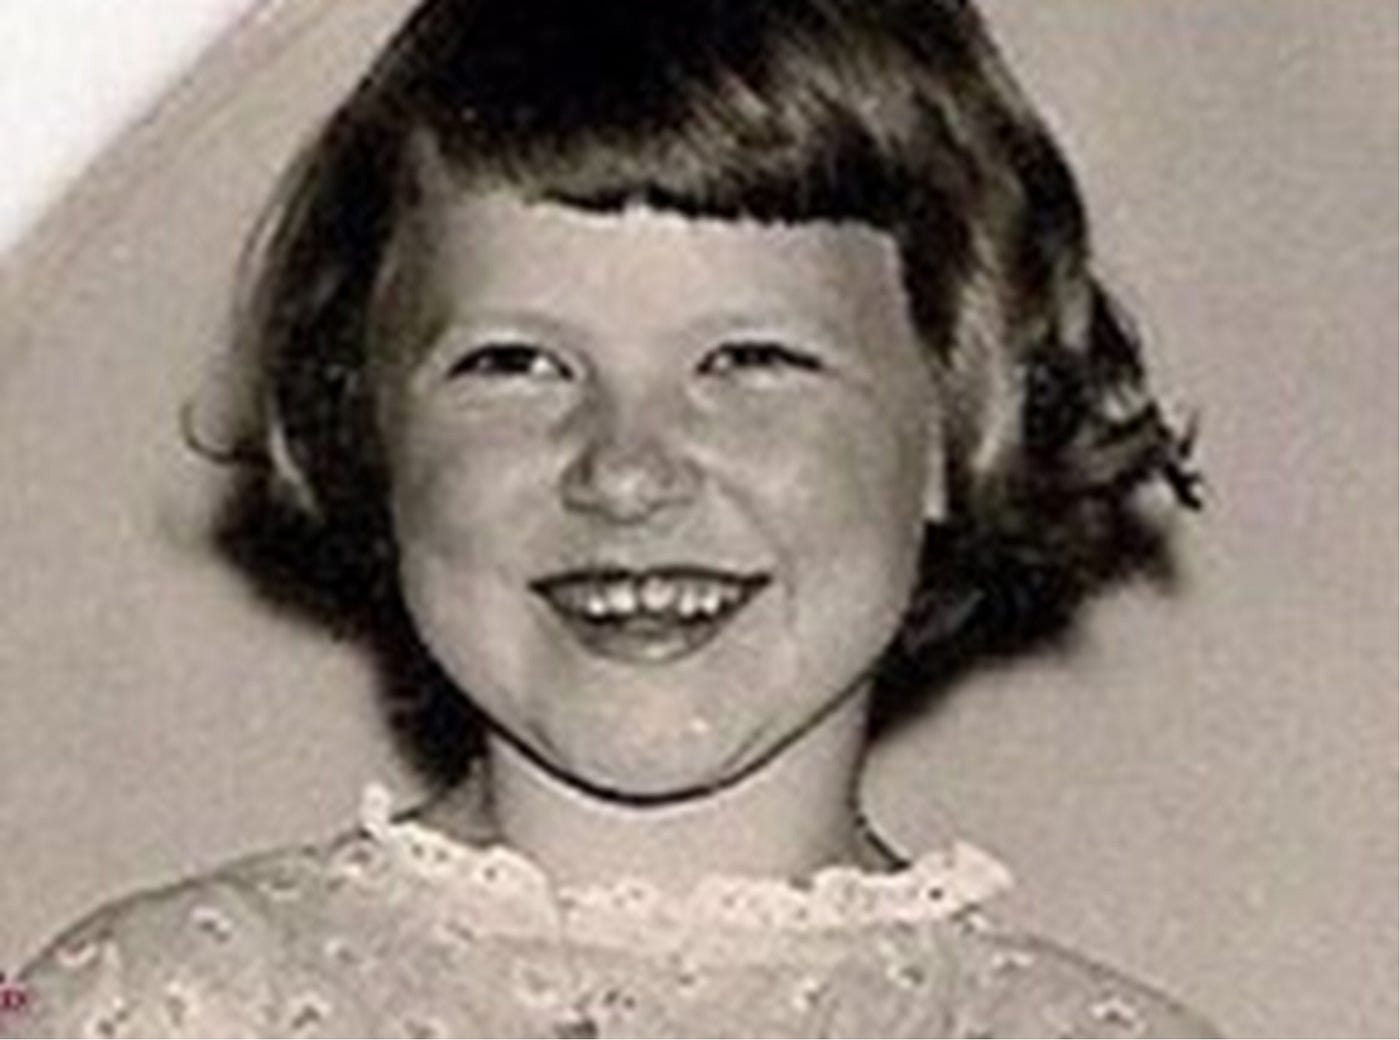 Did Ted Bundy Kidnap Little Ann Marie Burr? A 1961 Cold Case From Tacoma |  by Kym L Pasqualini | Medium